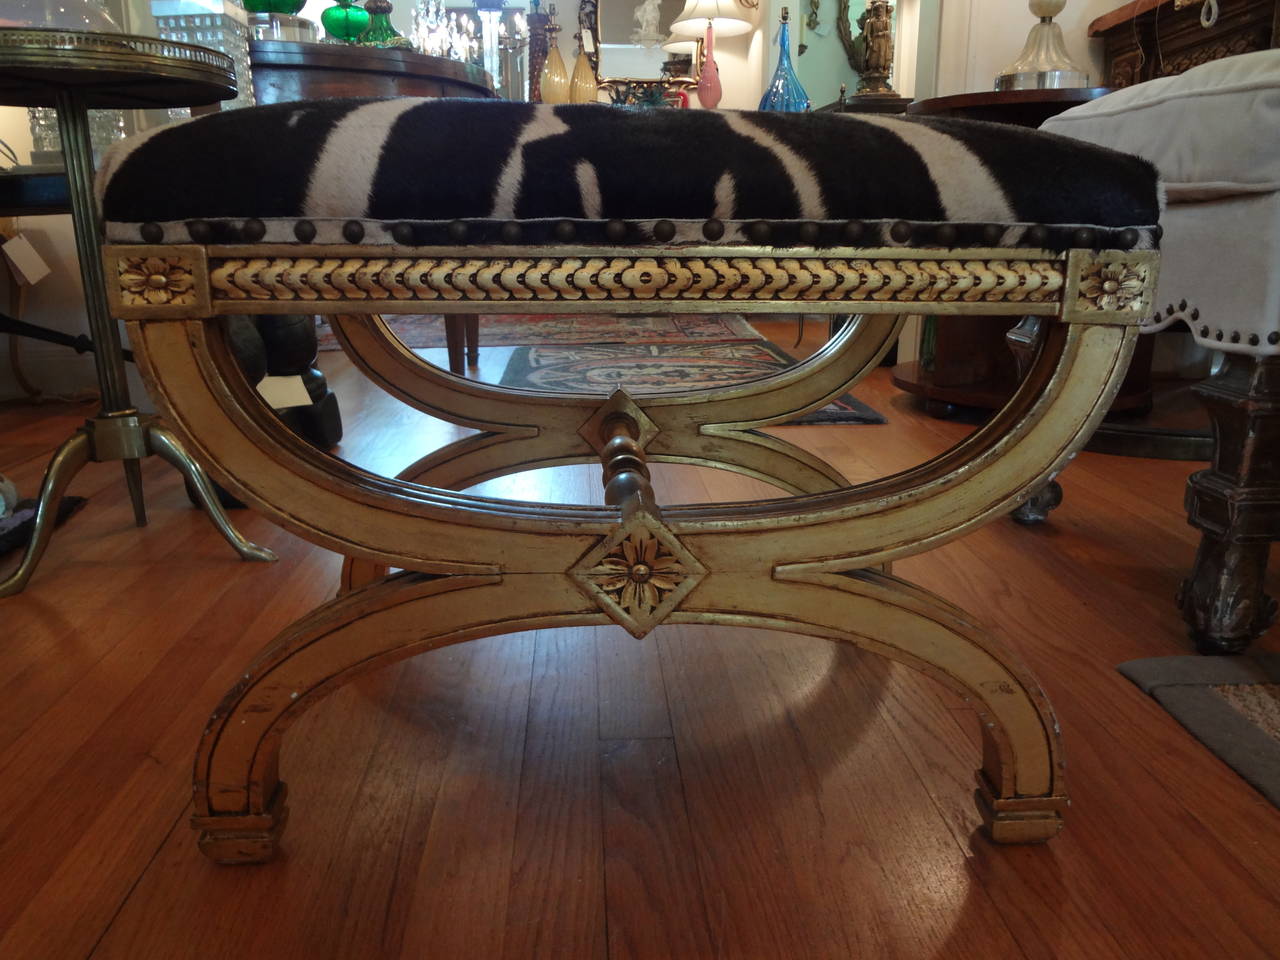 Simple and elegant French Louis XVI style giltwood bench/tabouret newly upholstered in zebra hide with brass nailhead trim.

Please click KIRBY ANTIQUES logo below to view additional pieces from our vast inventory.

 